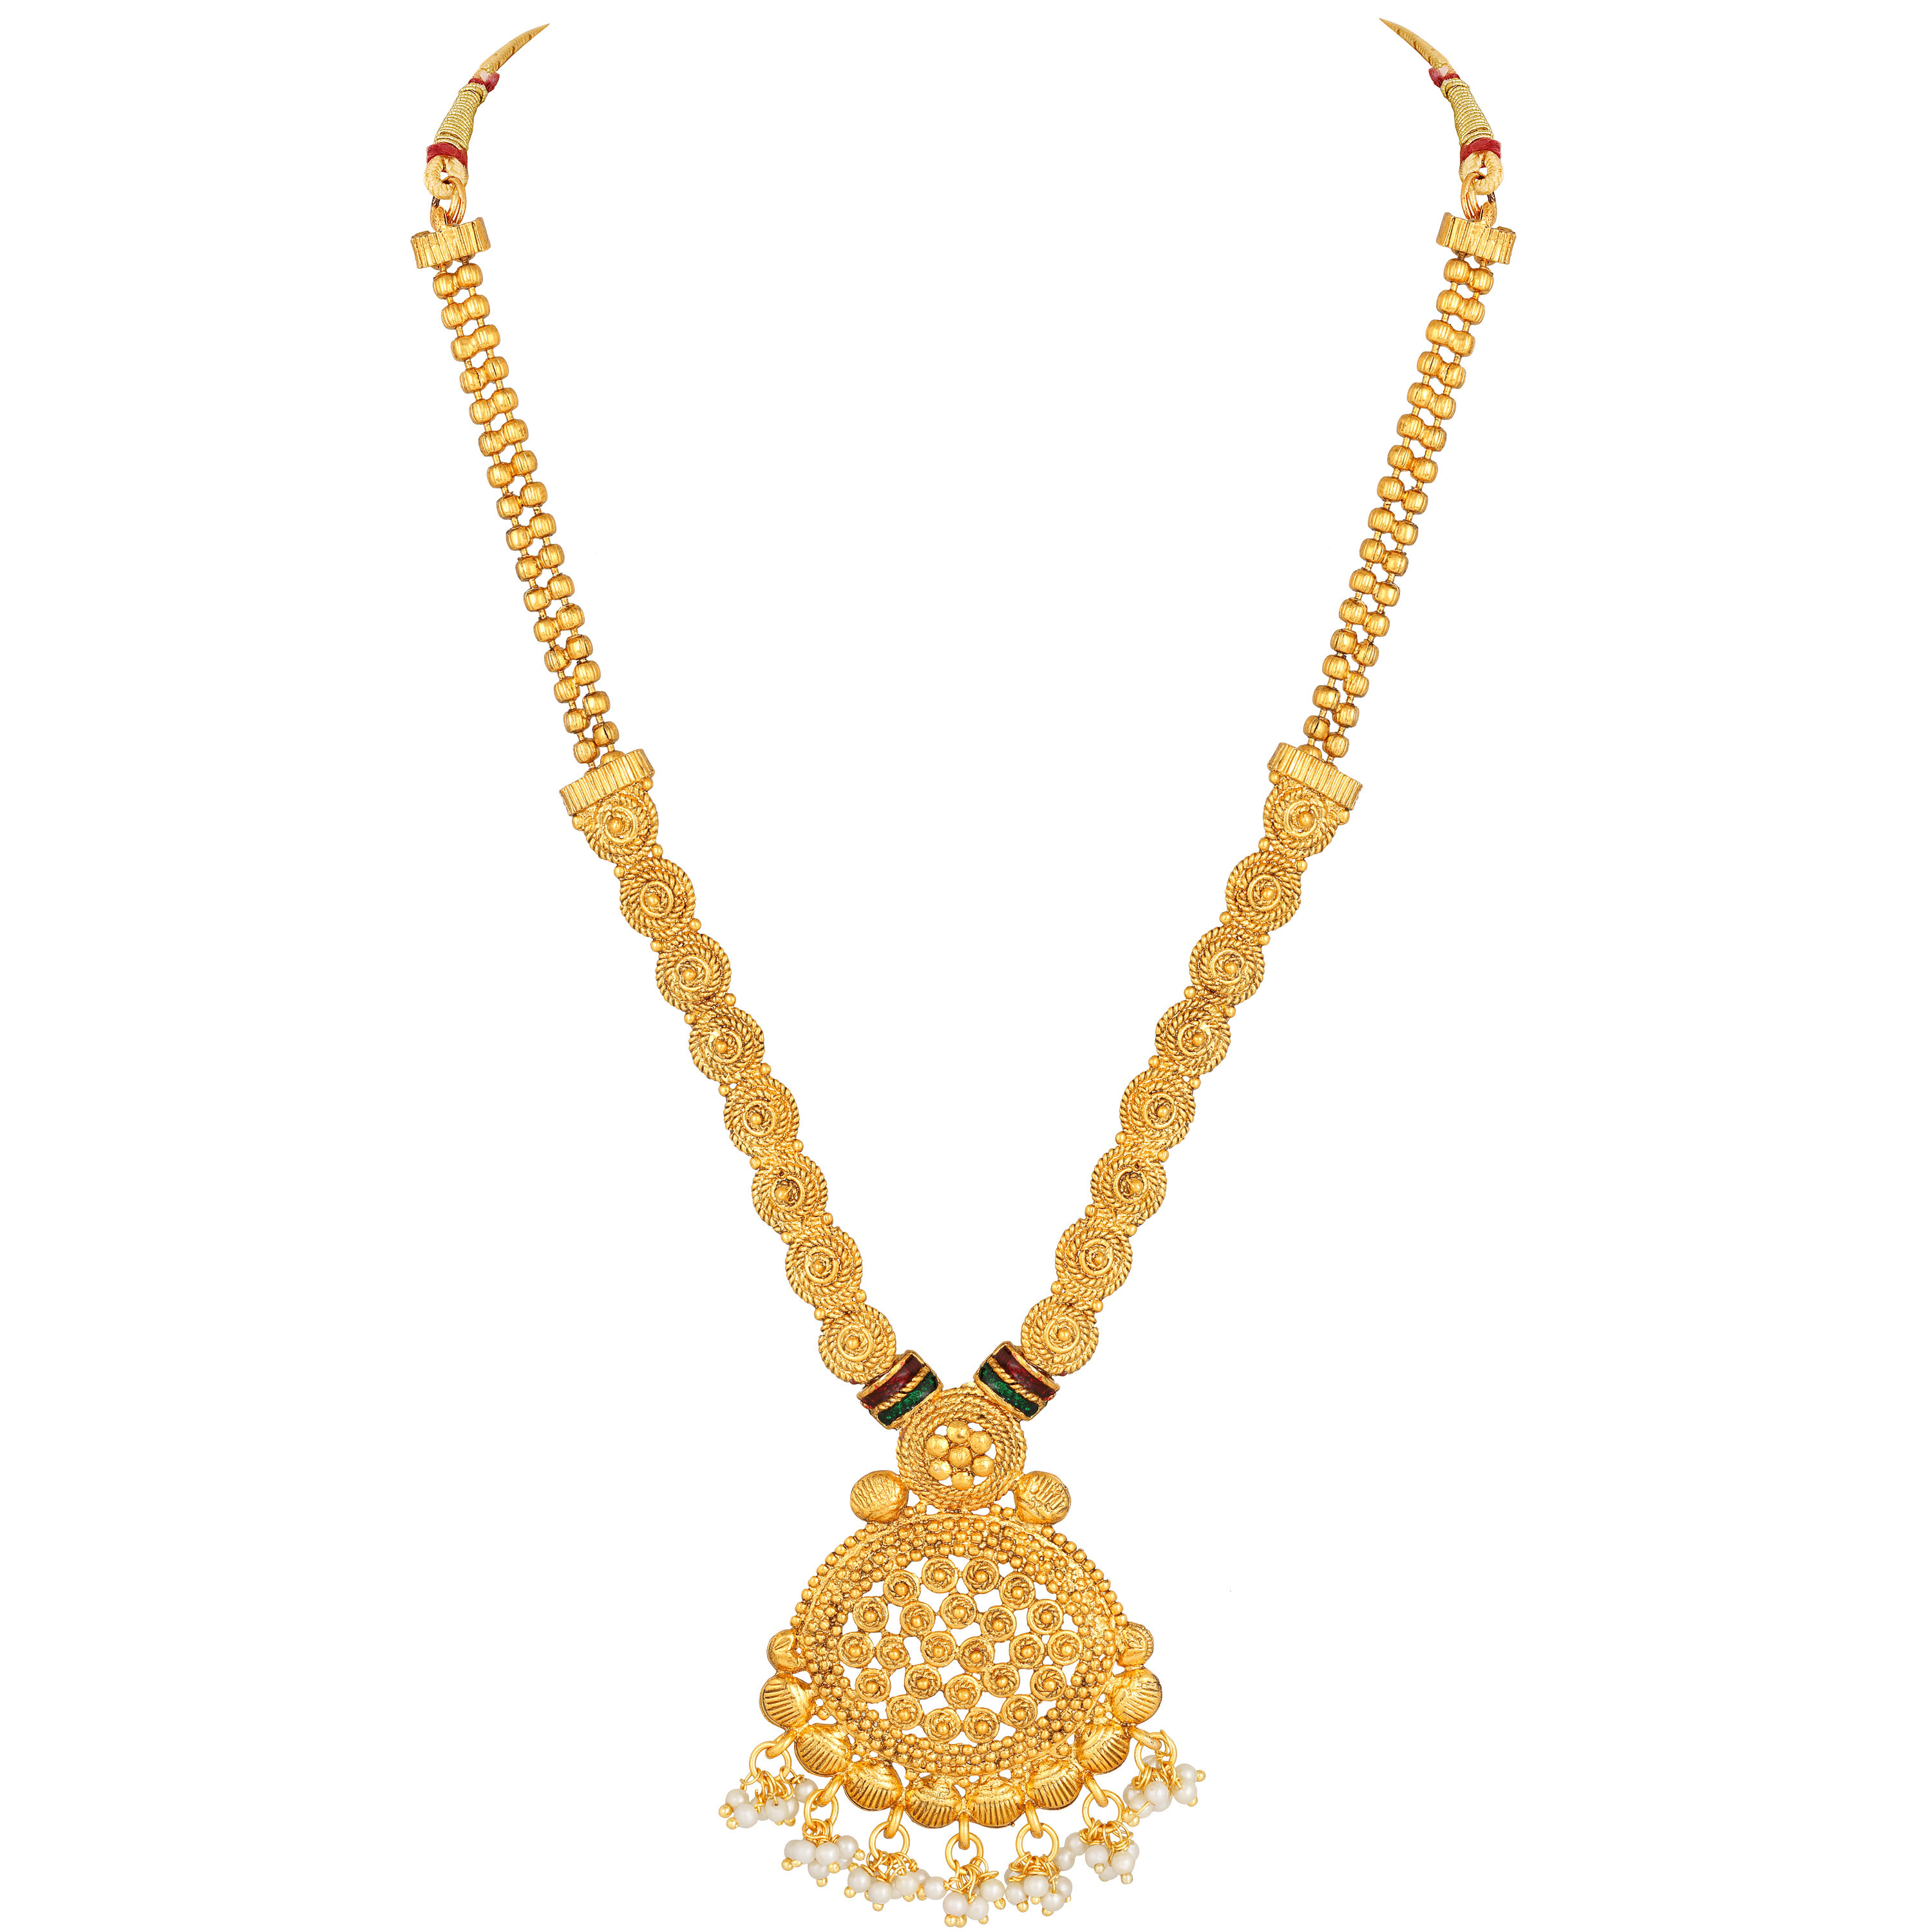 24k Gold Plated Moroccan Turkish Dubai Jewelry Necklace, Earrings Indian  set | eBay